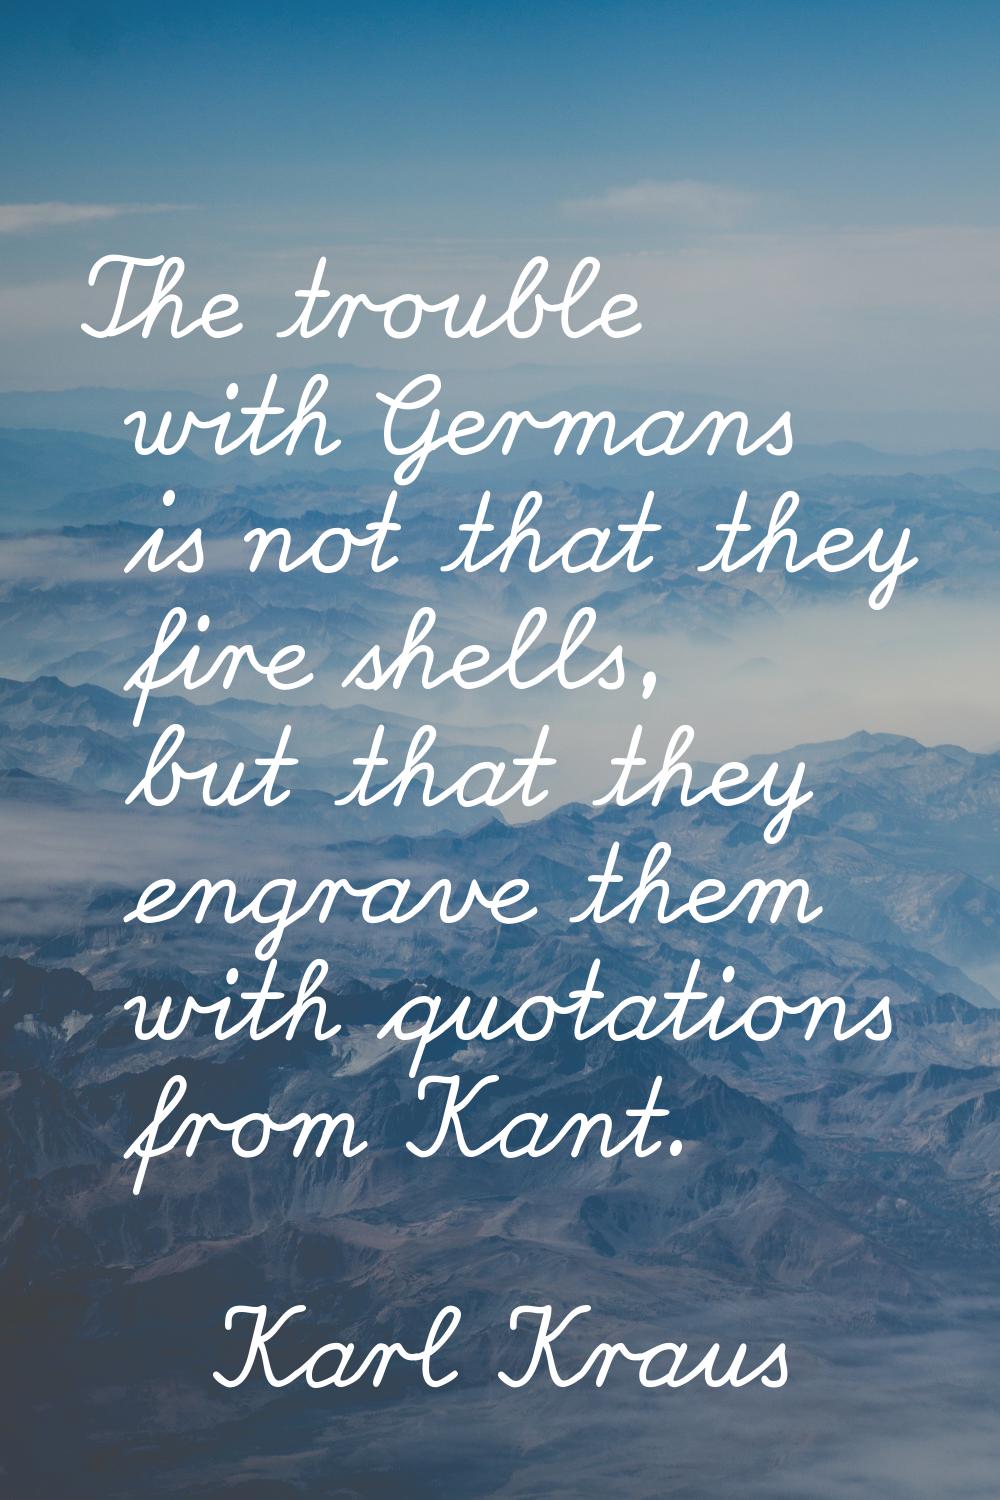 The trouble with Germans is not that they fire shells, but that they engrave them with quotations f